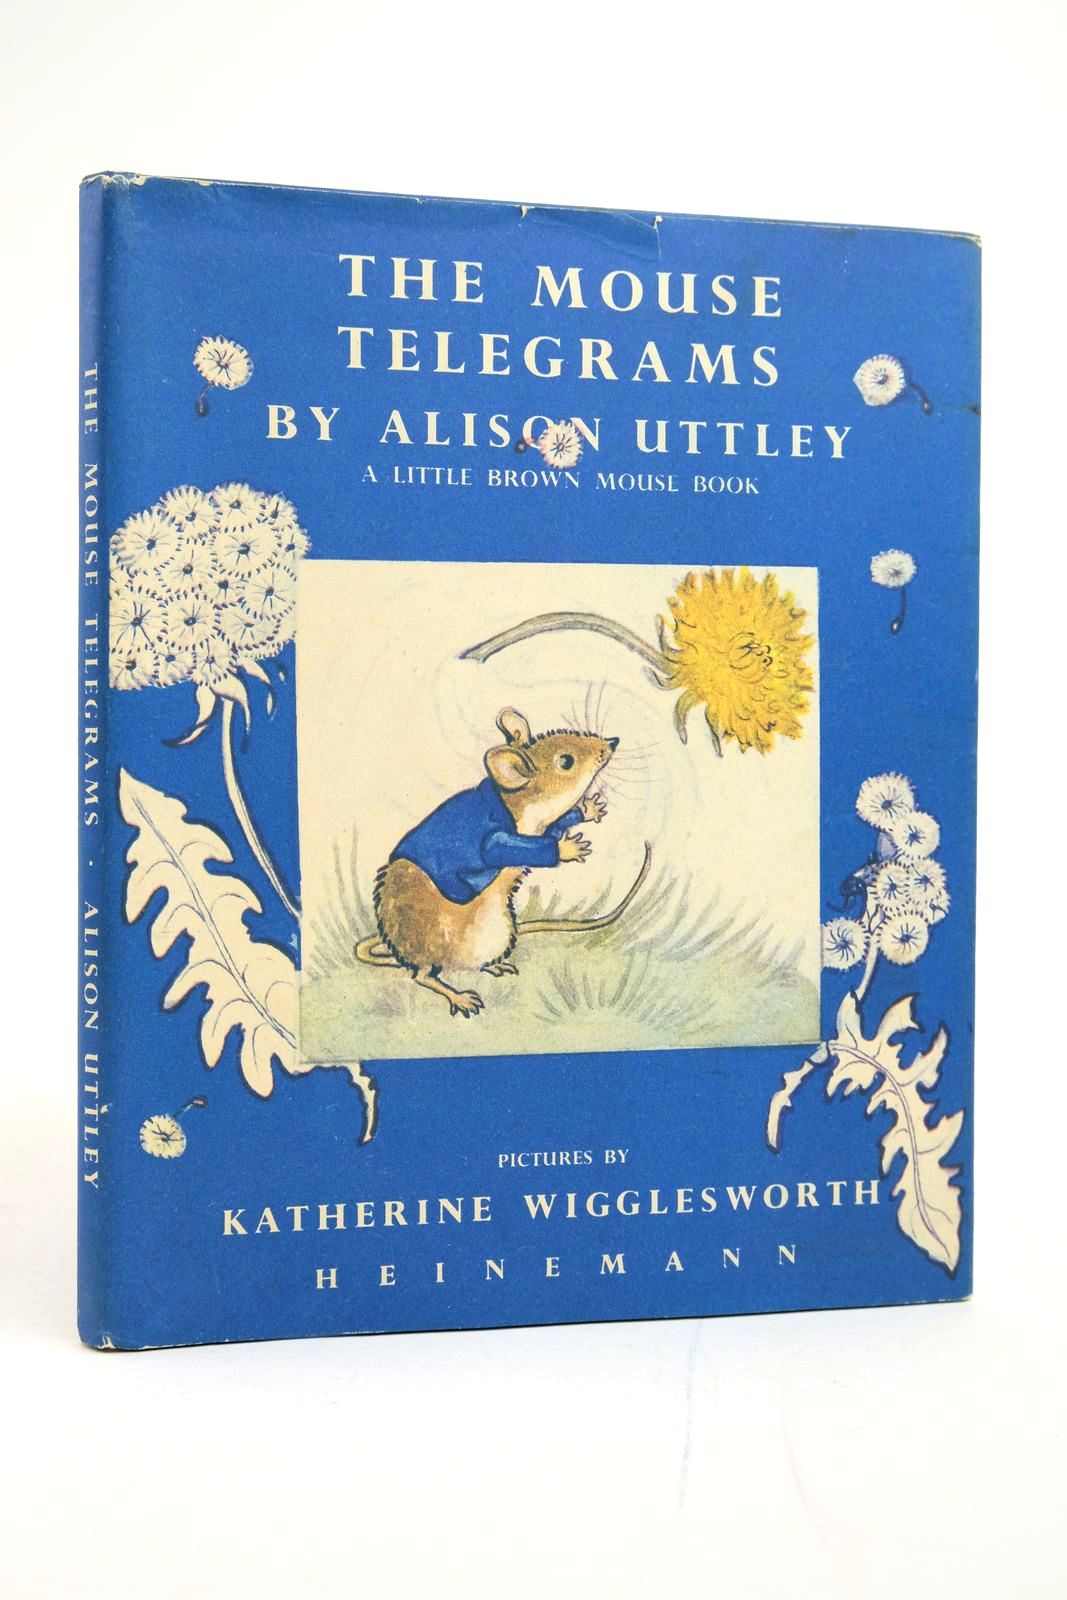 Photo of THE MOUSE TELEGRAMS written by Uttley, Alison illustrated by Wigglesworth, Katherine published by Heinemann (STOCK CODE: 2135213)  for sale by Stella & Rose's Books